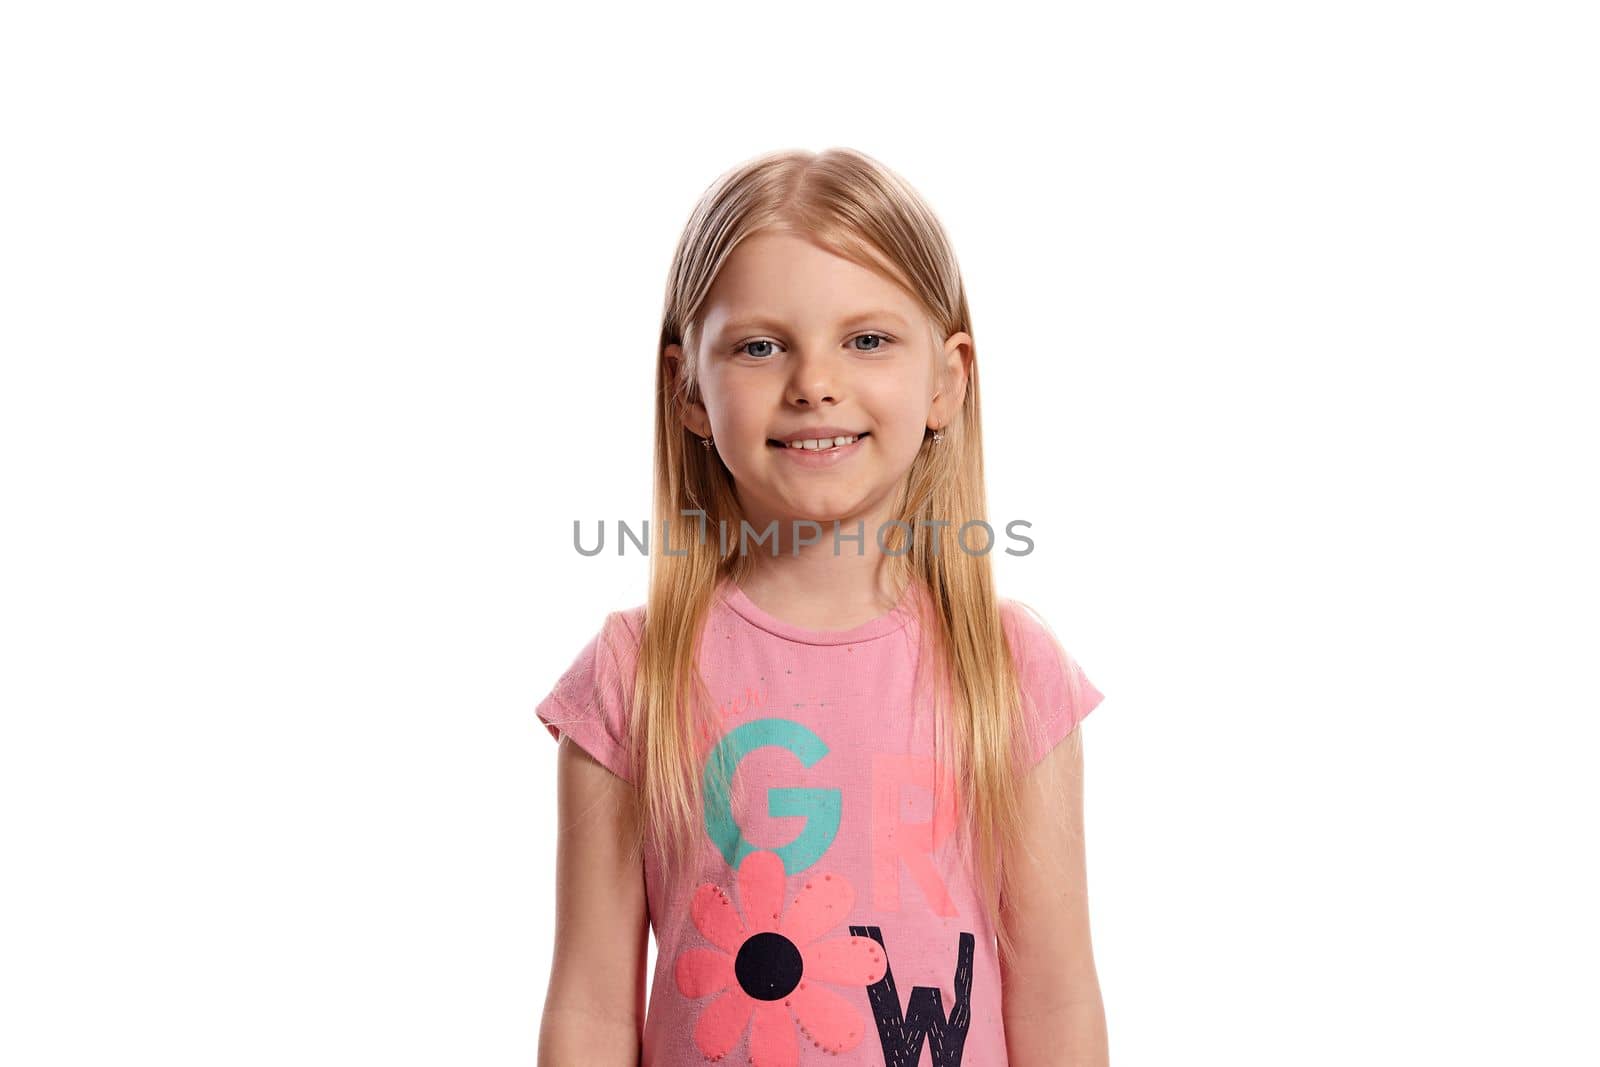 Close-up portrait of a cheerful blonde little female with a long hair, in a pink t-shirt, looking happy isolated on white background with copy space. Concept of a joyful childhood.